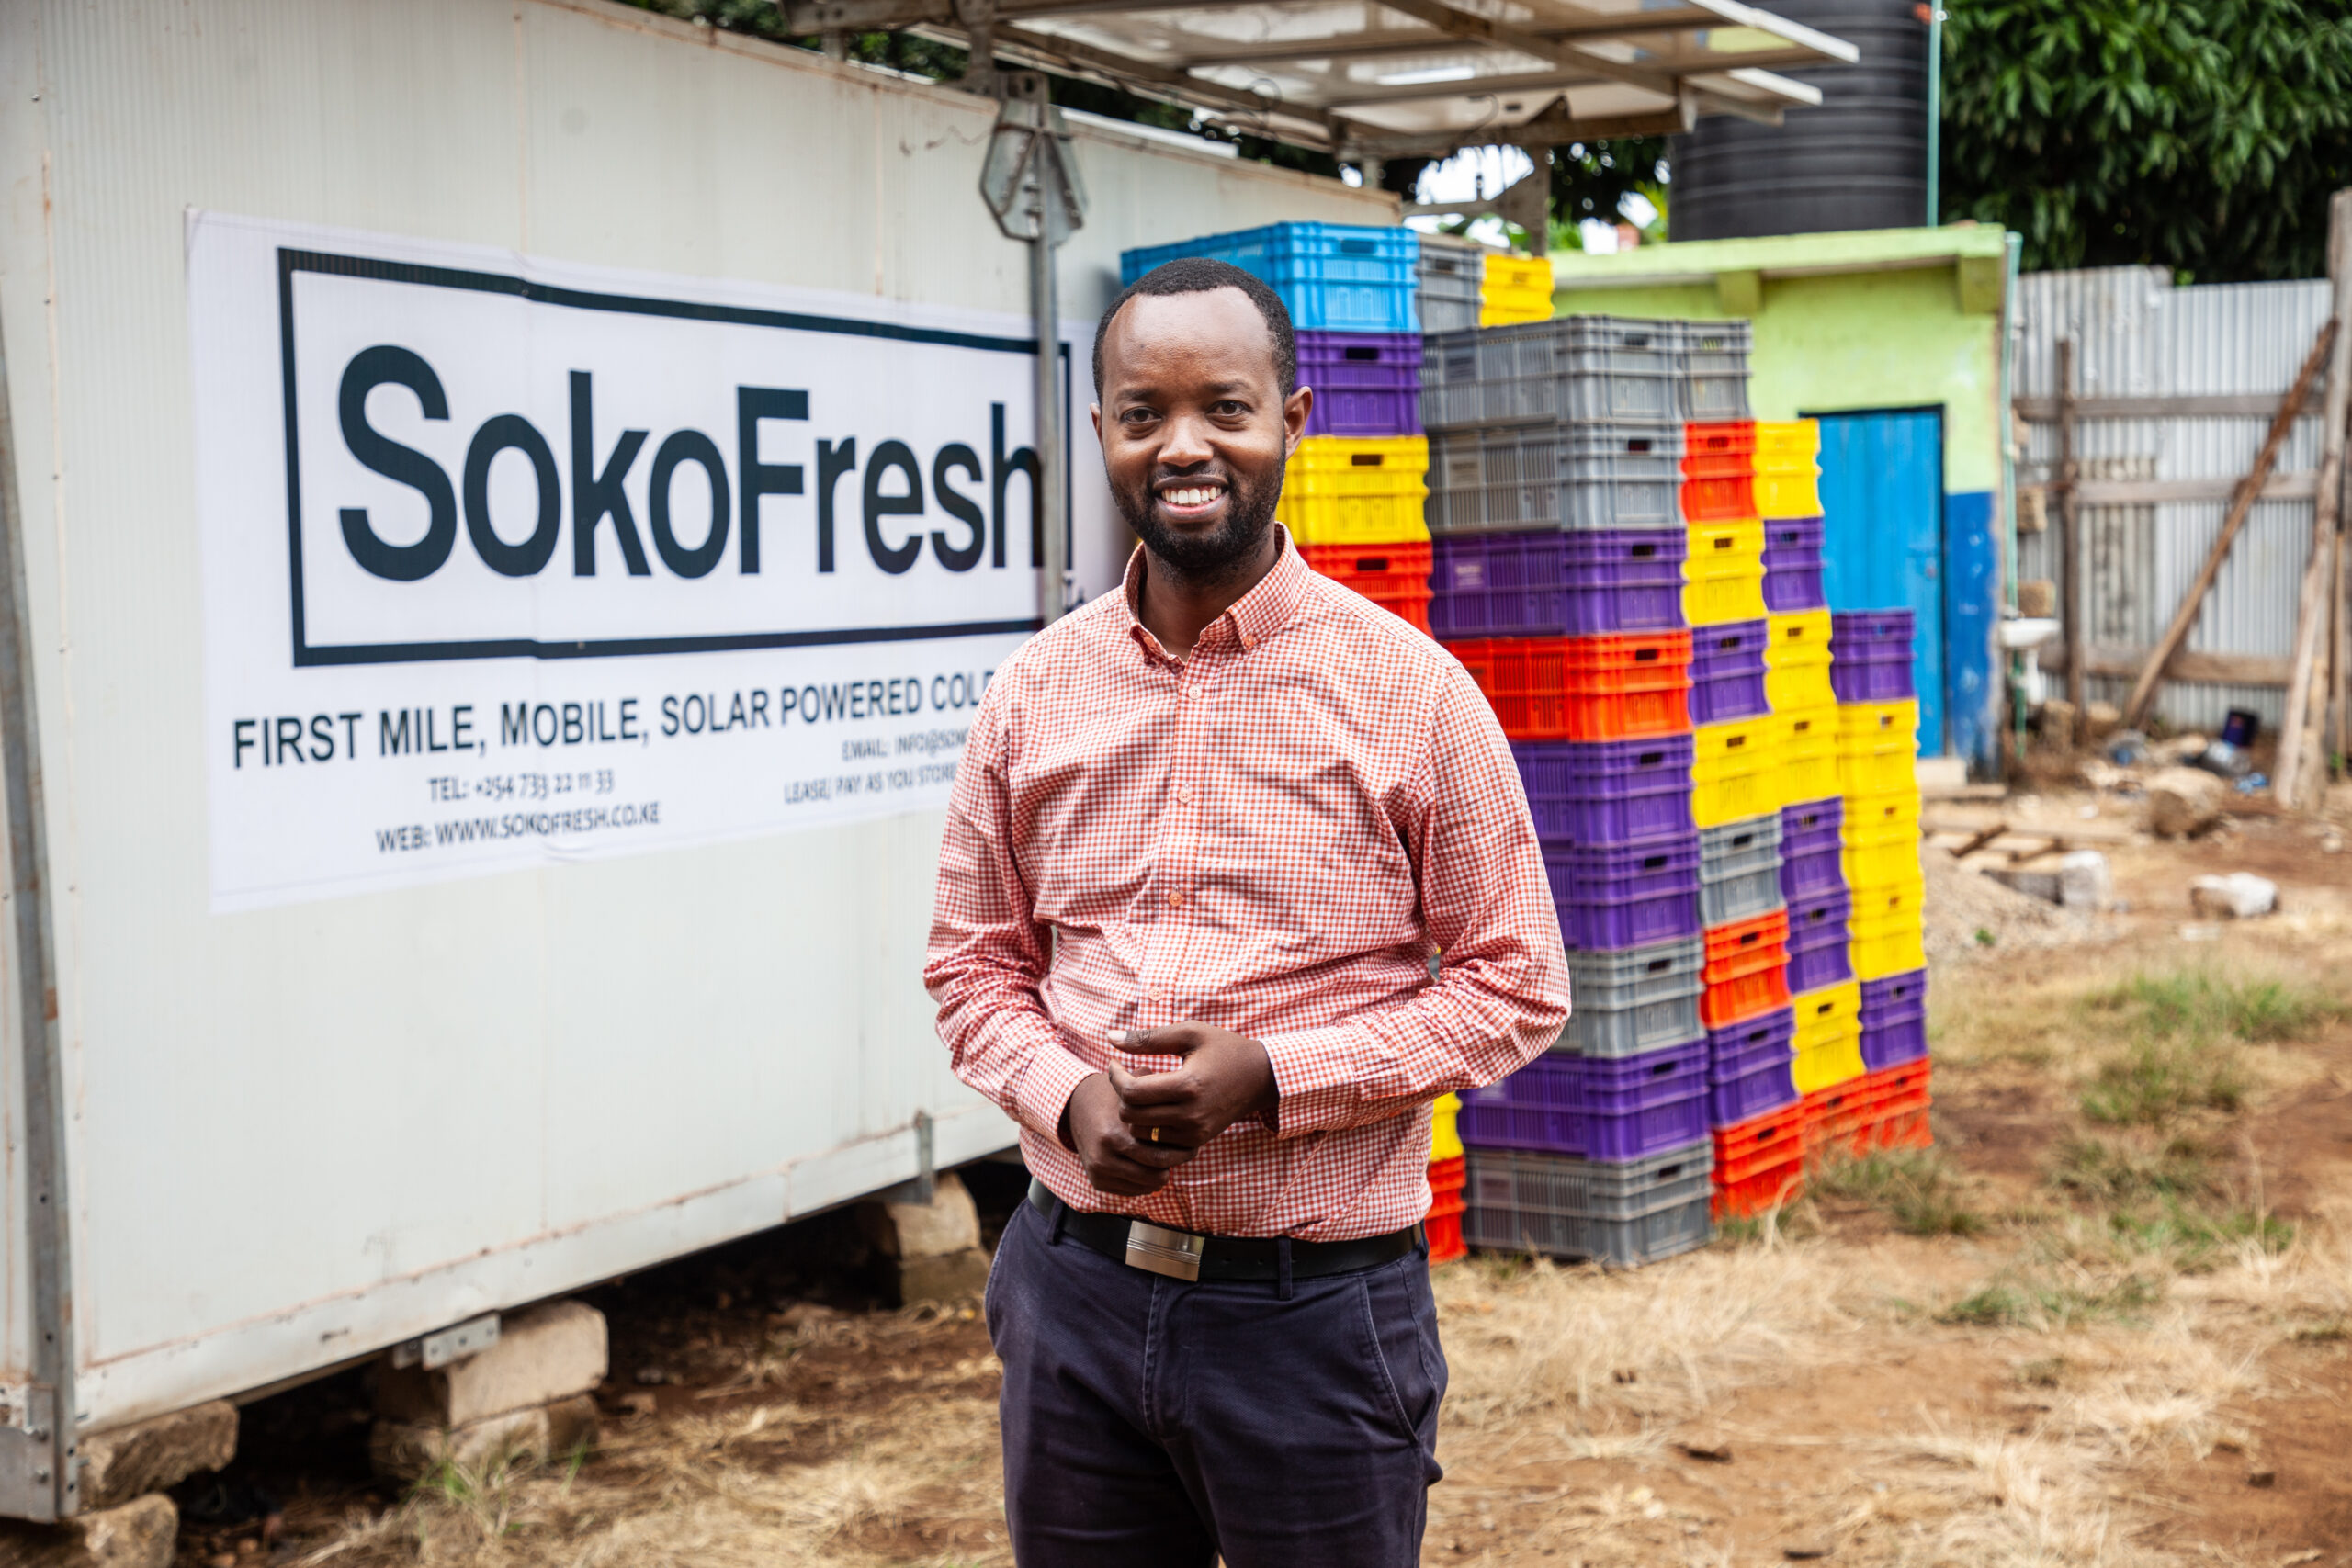 A man in an orange collared shirt stands in front of a stacked crates and a large unit that reads "Soko Fresh"